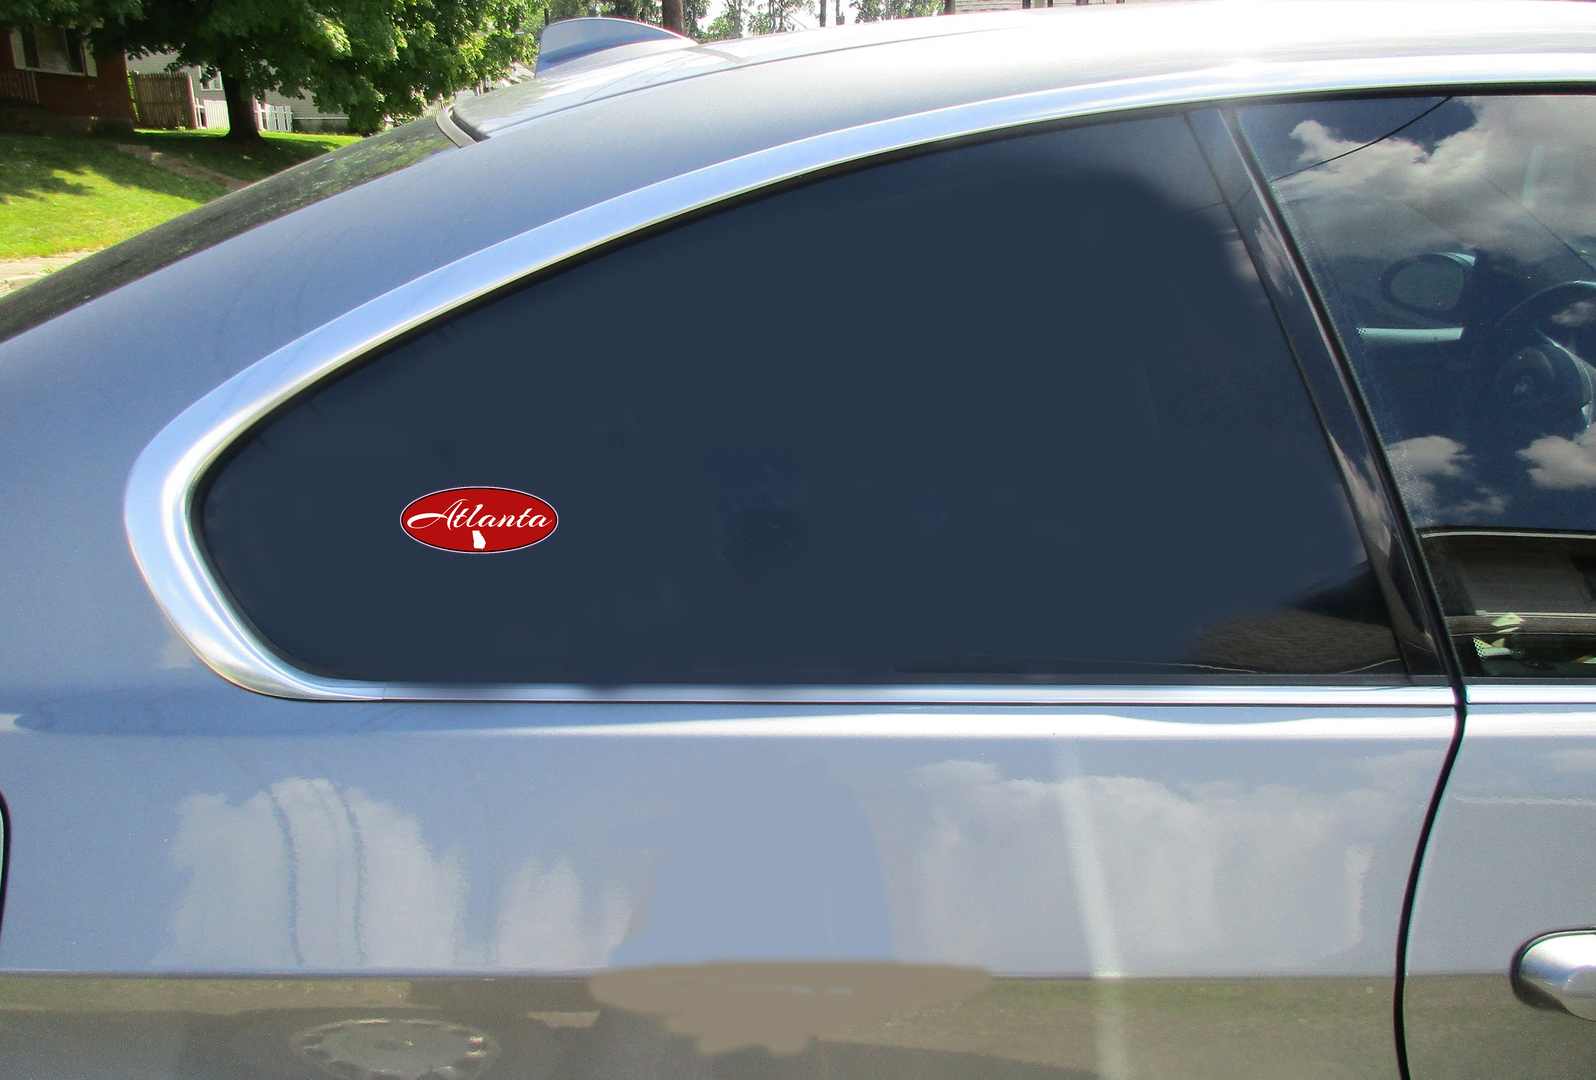 Atlanta Red Stretched Oval Decal - Car Decals - U.S. Custom Stickers